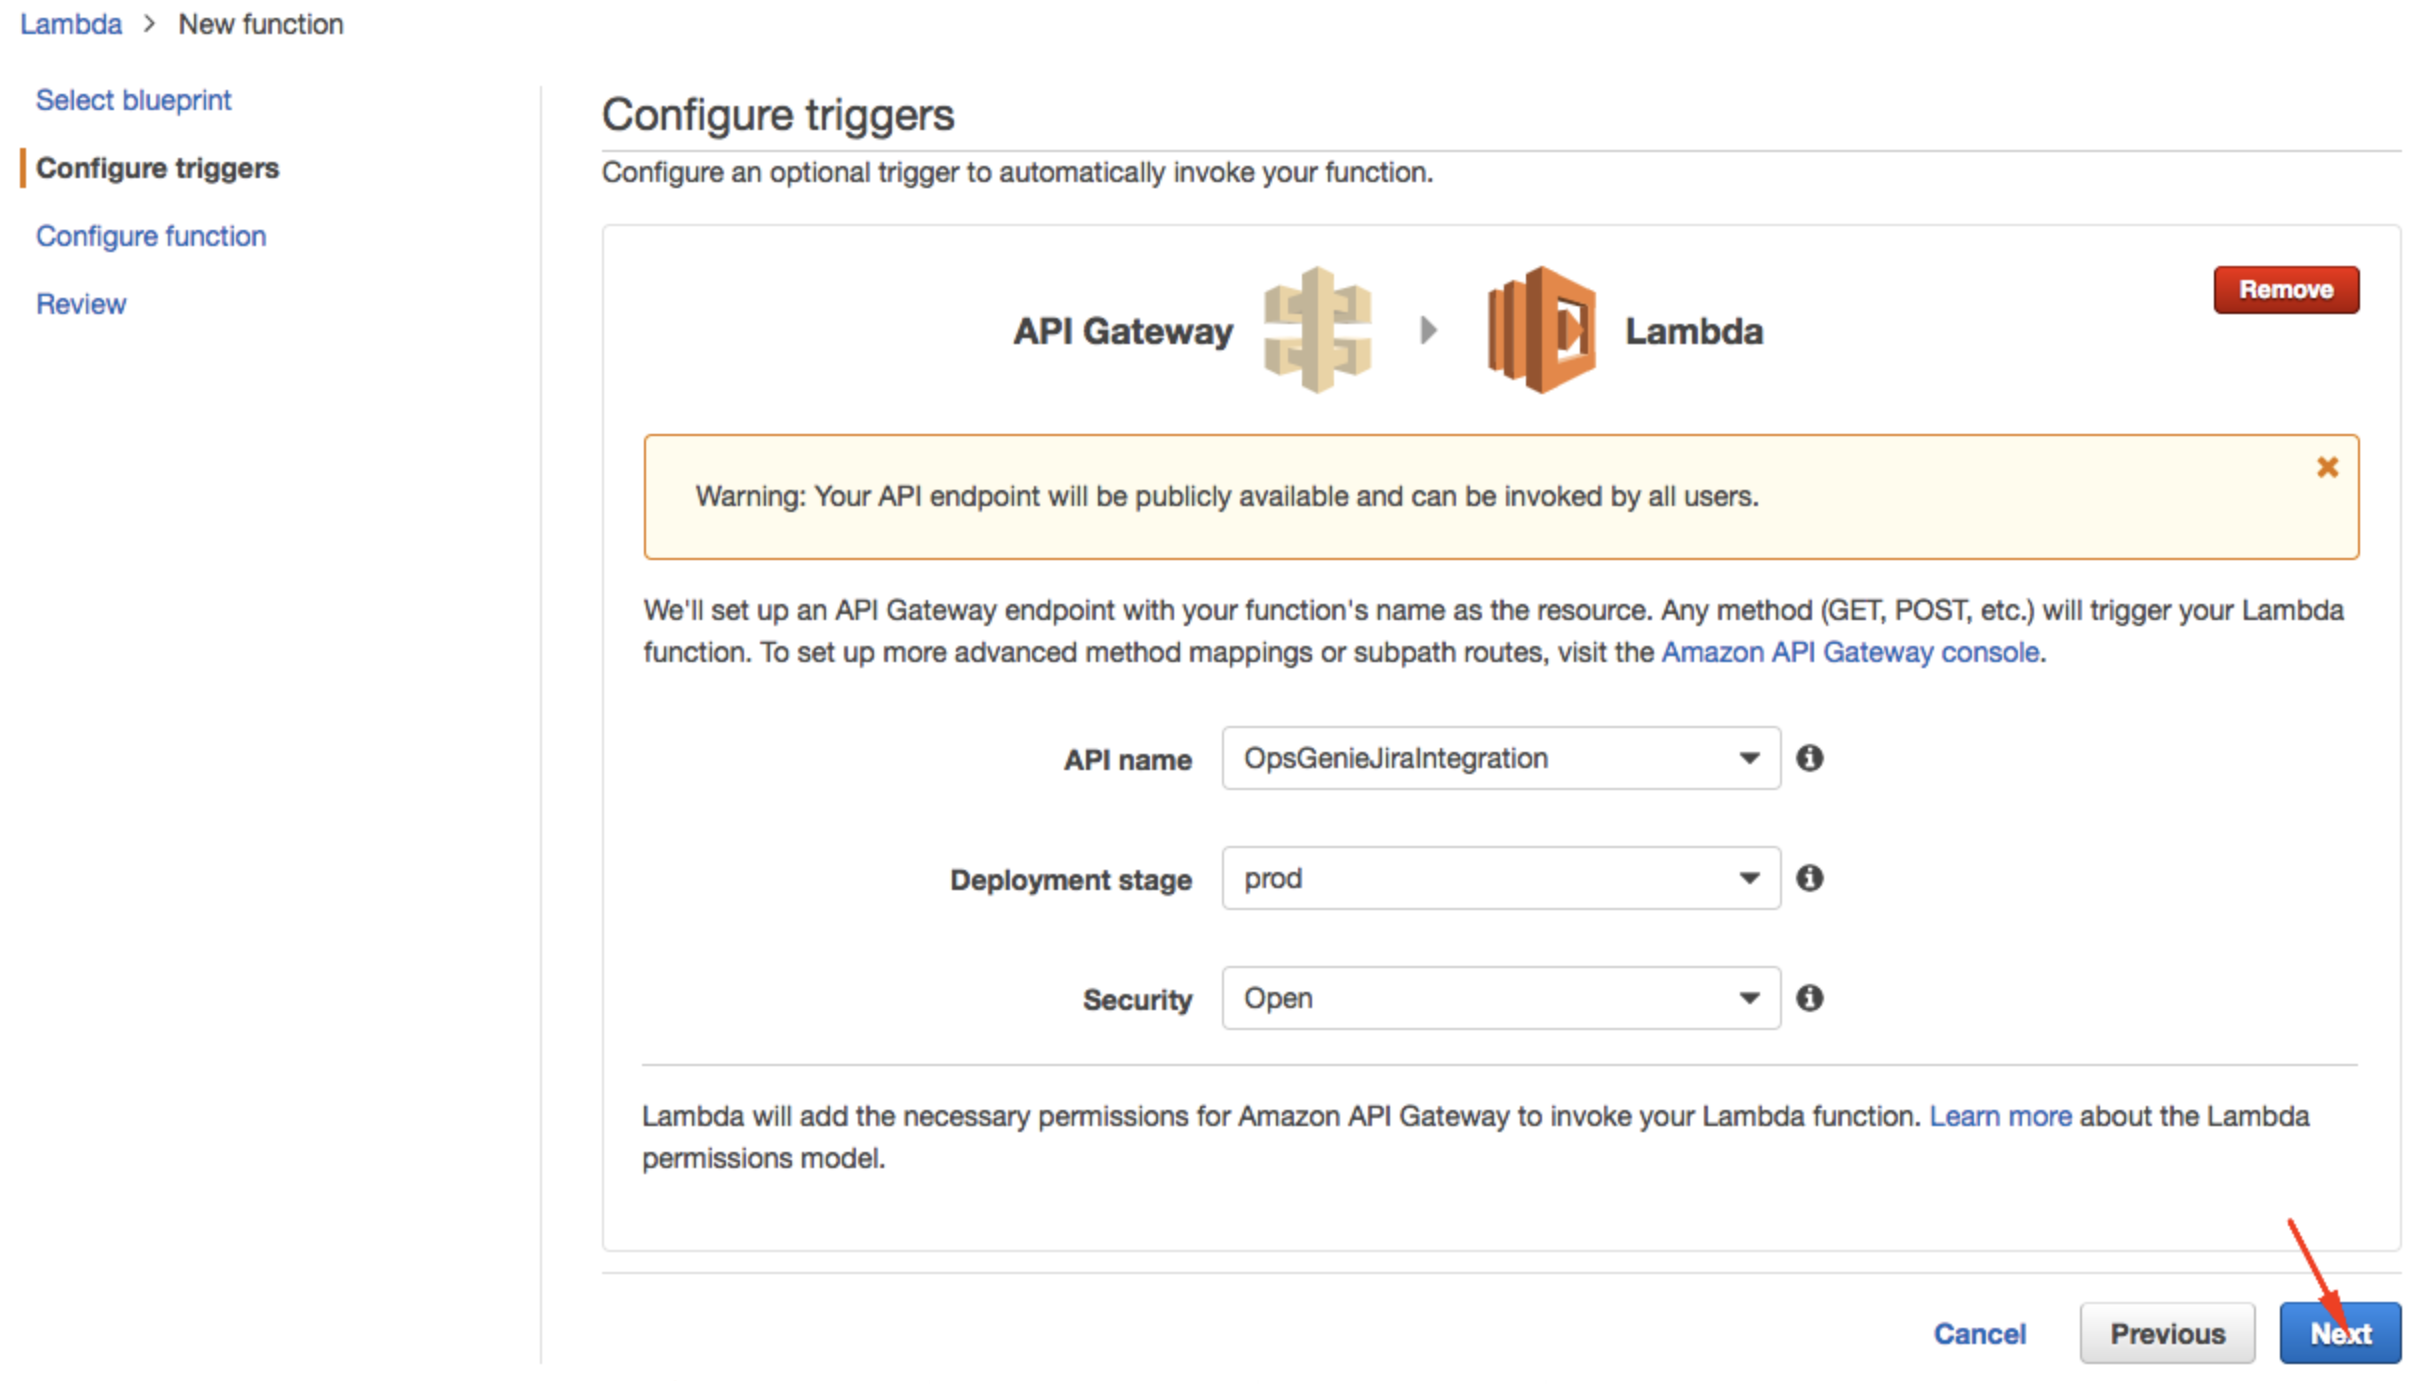 An image showing the navigation for configure triggers in AWS Lambda.